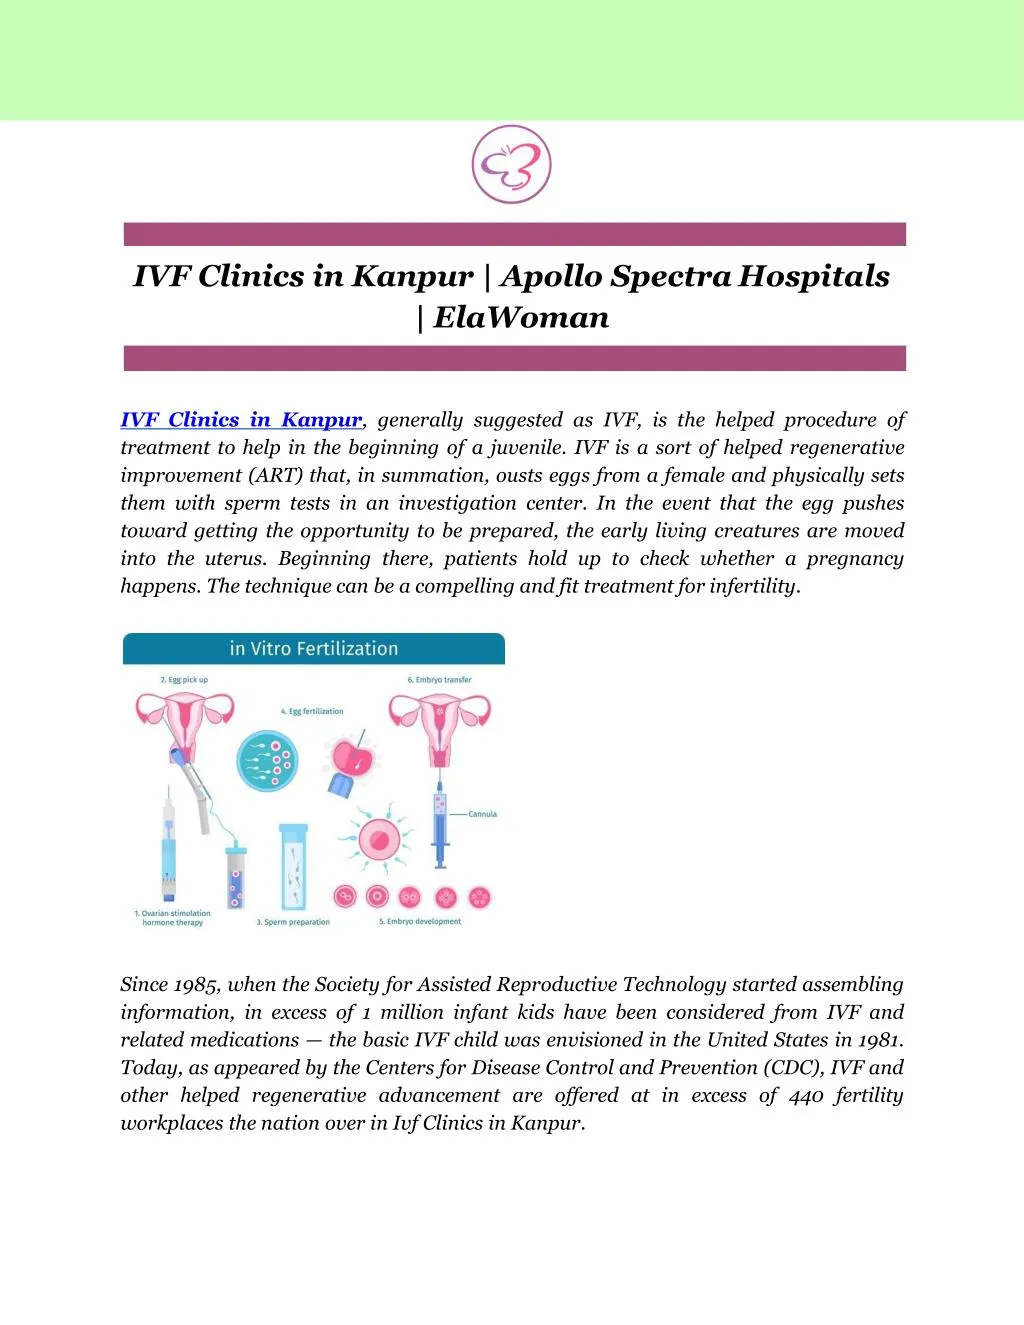 ivf clinics in kanpur apollo spectra hospitals